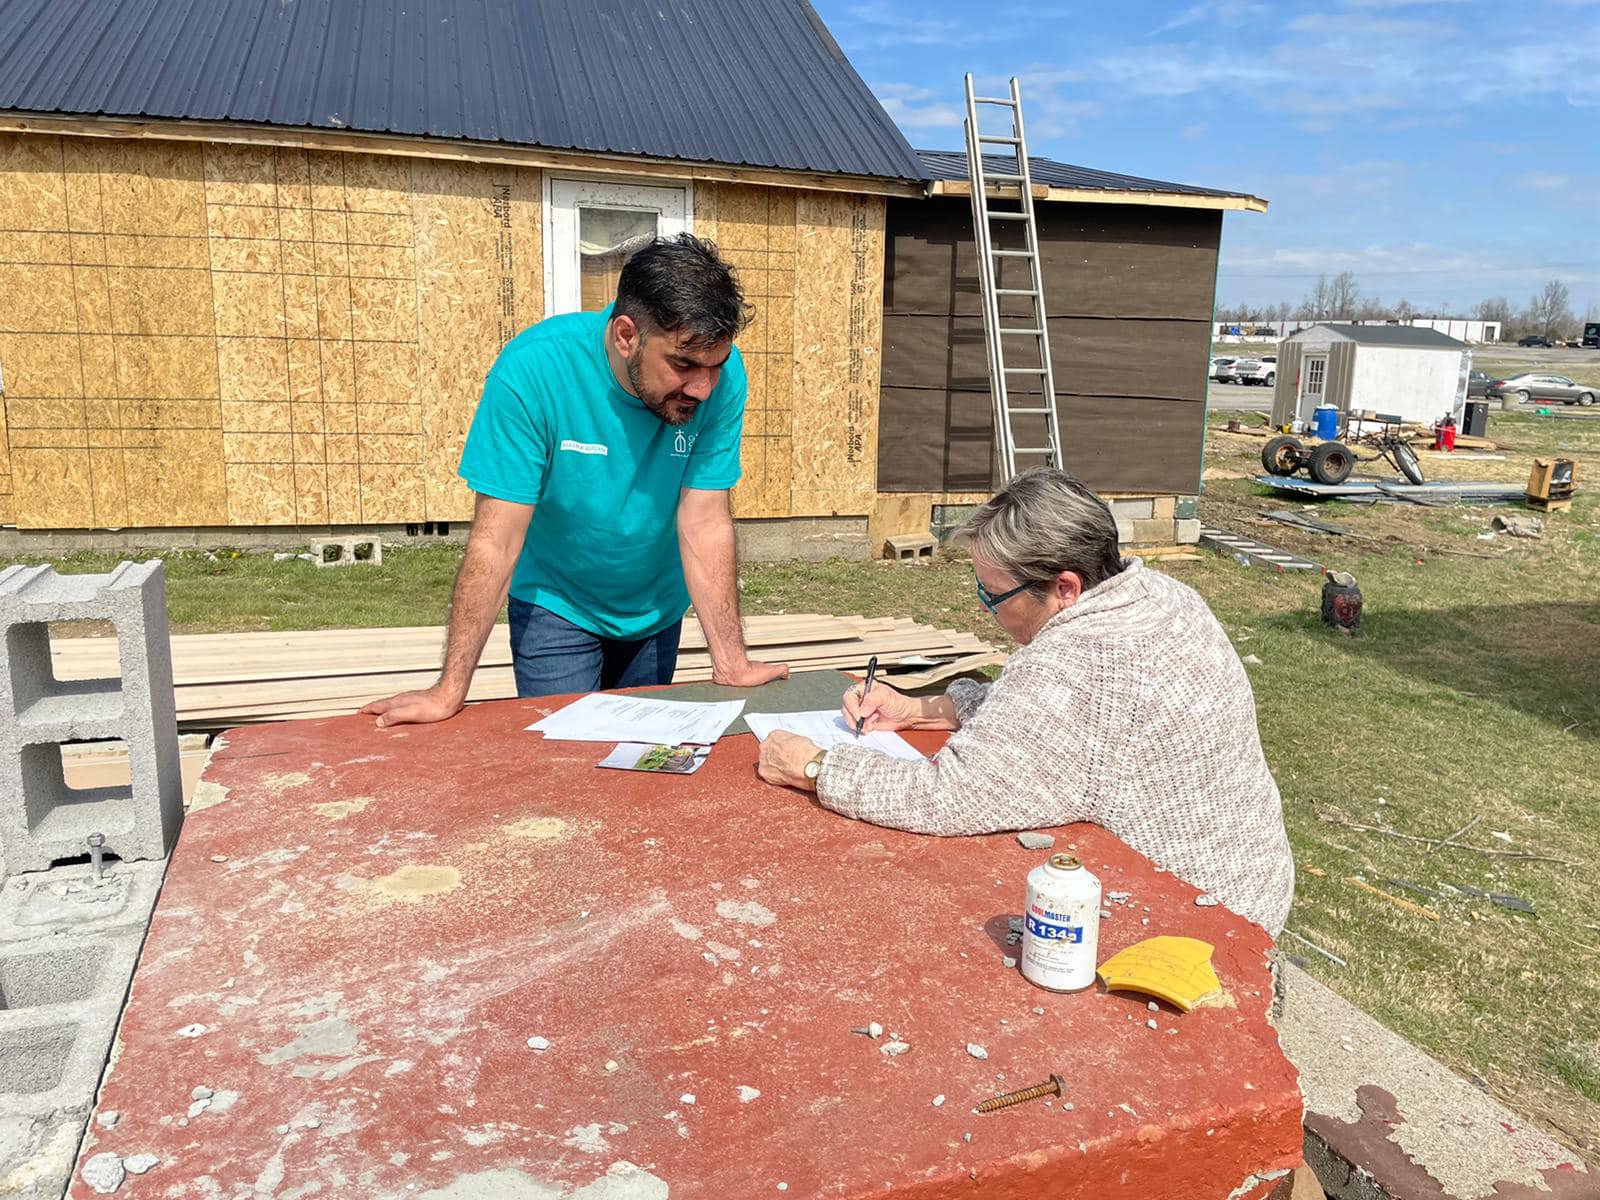 Khaibar Shafaq, a paralegal and case manager for Catholic Charities of the Diocese of Owensboro, Ky., works with Sheila Rose at the construction site of her home rebuild in Dawson Springs, Ky., March 15, 2022. Rose's home was destroyed by a tornado Dec. 10, 2021. (CNS photo/courtesy Susan Montalvo-Gesser)